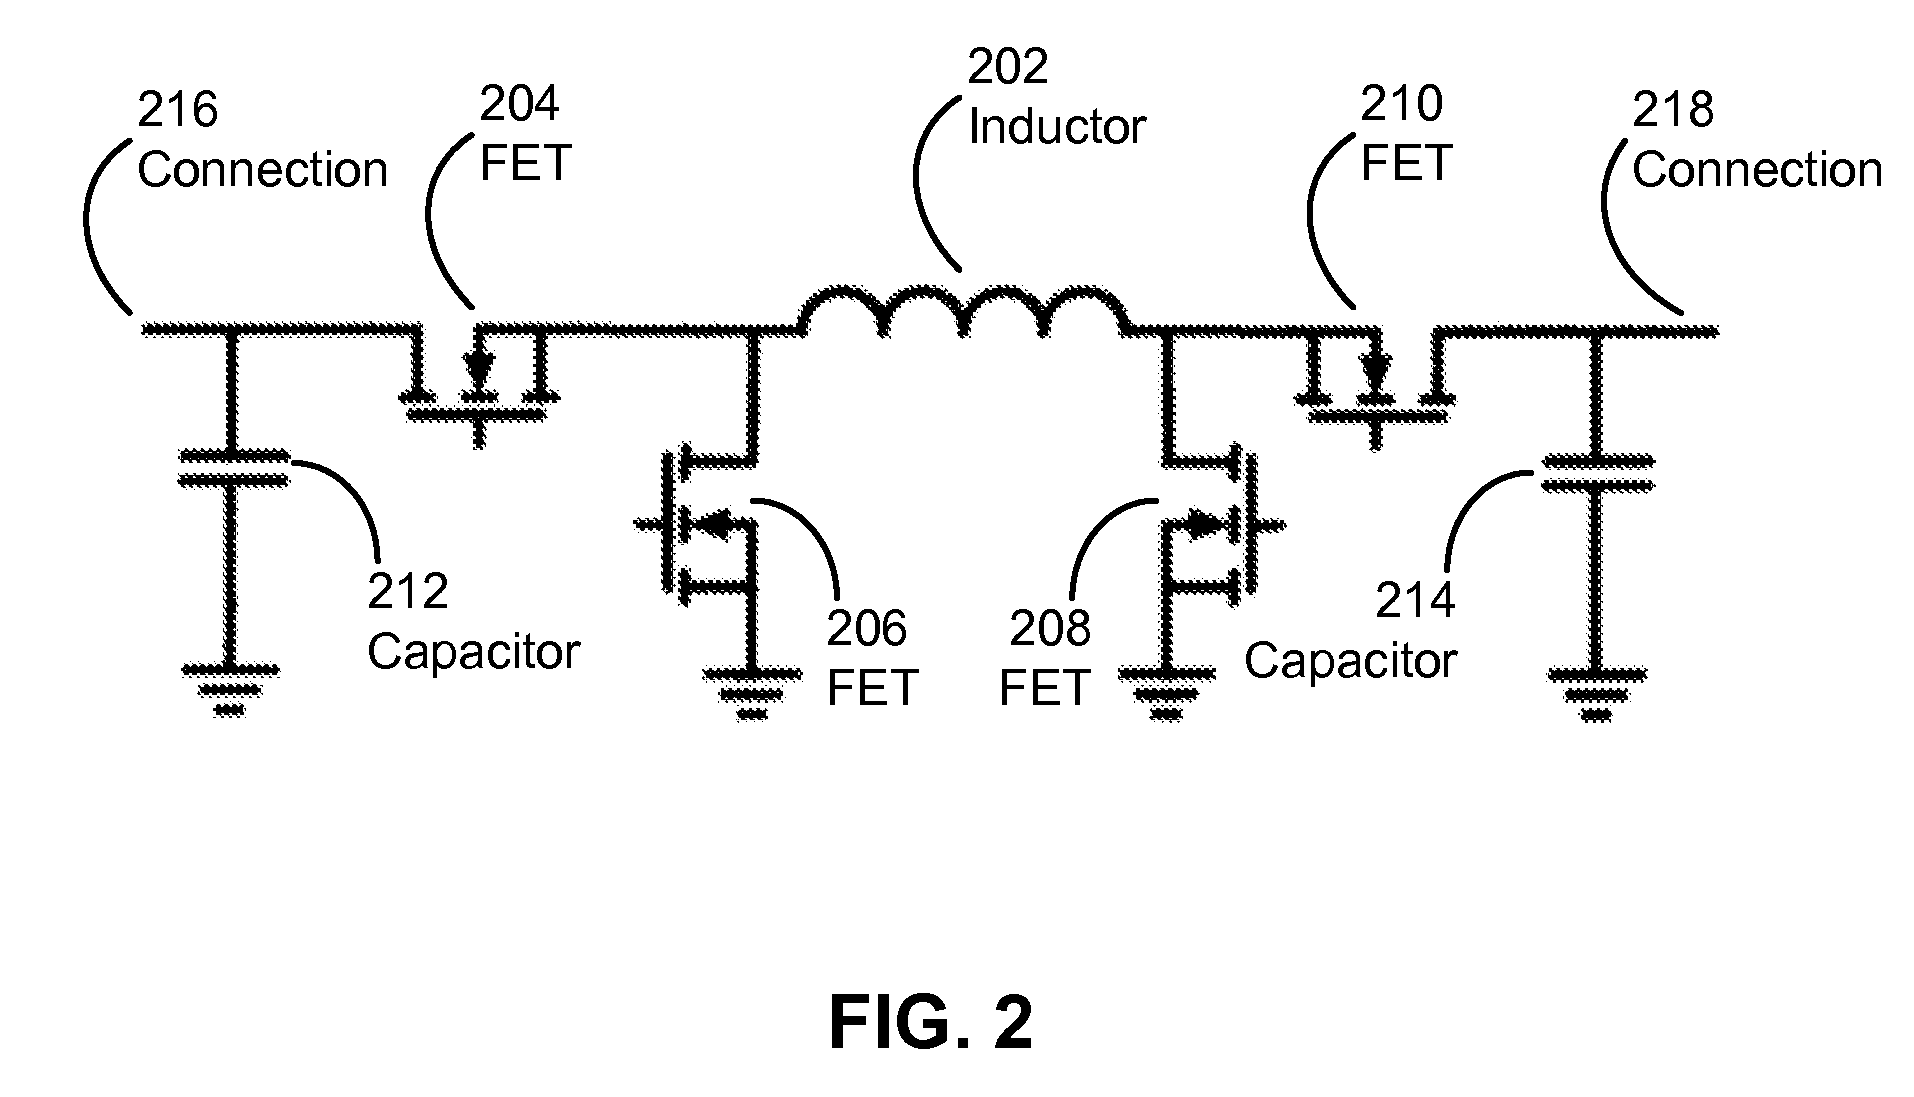 Parallel battery architecture with shared bidirectional converter